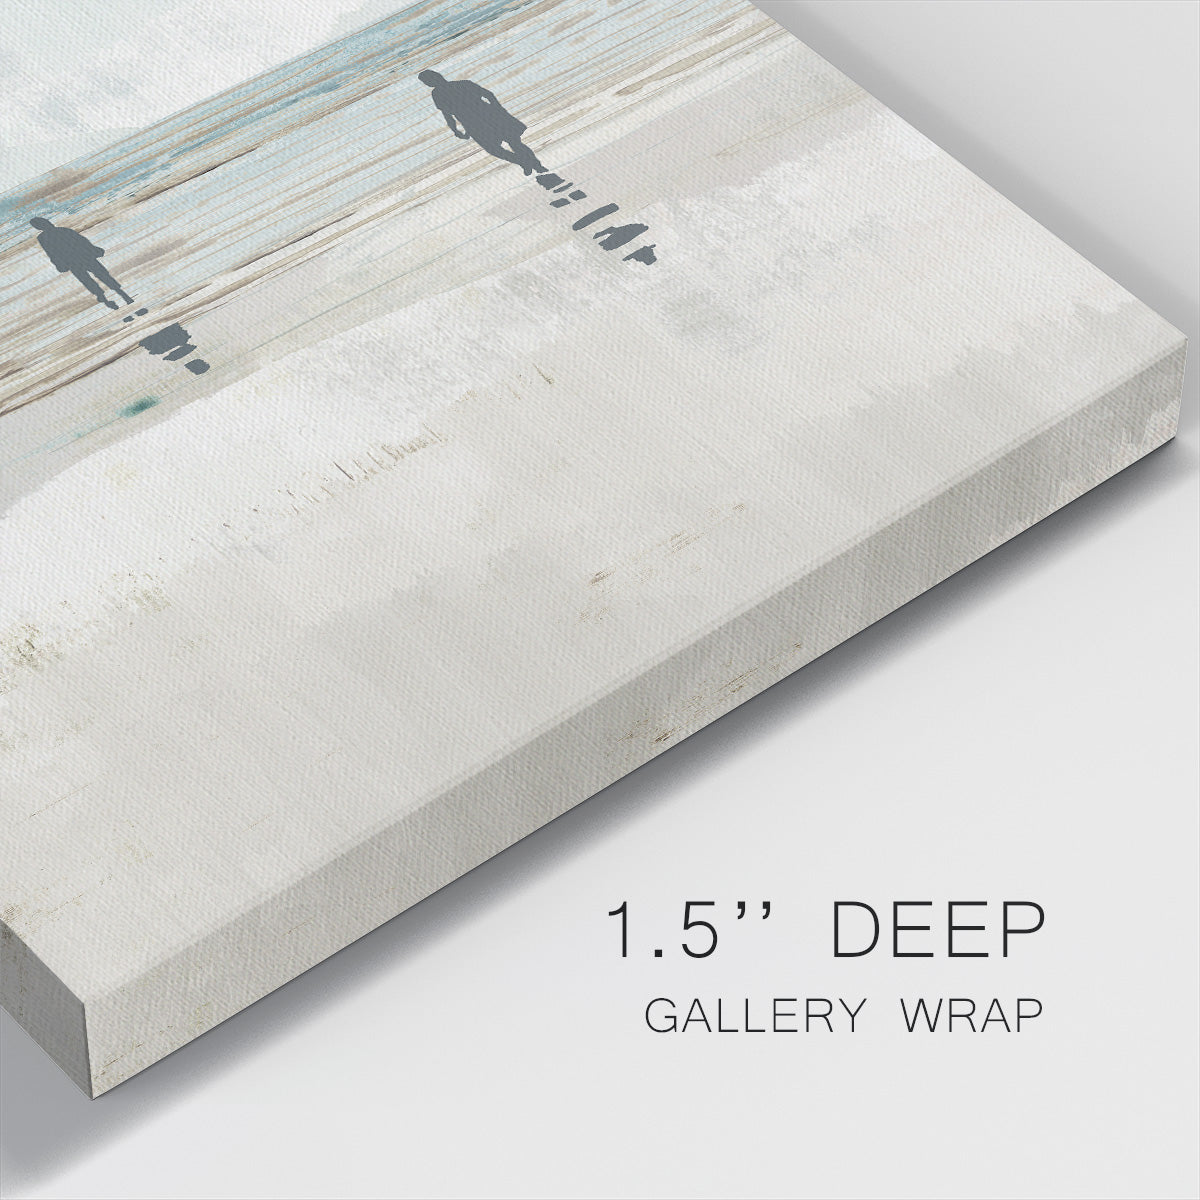 Beach Walking III-Premium Gallery Wrapped Canvas - Ready to Hang